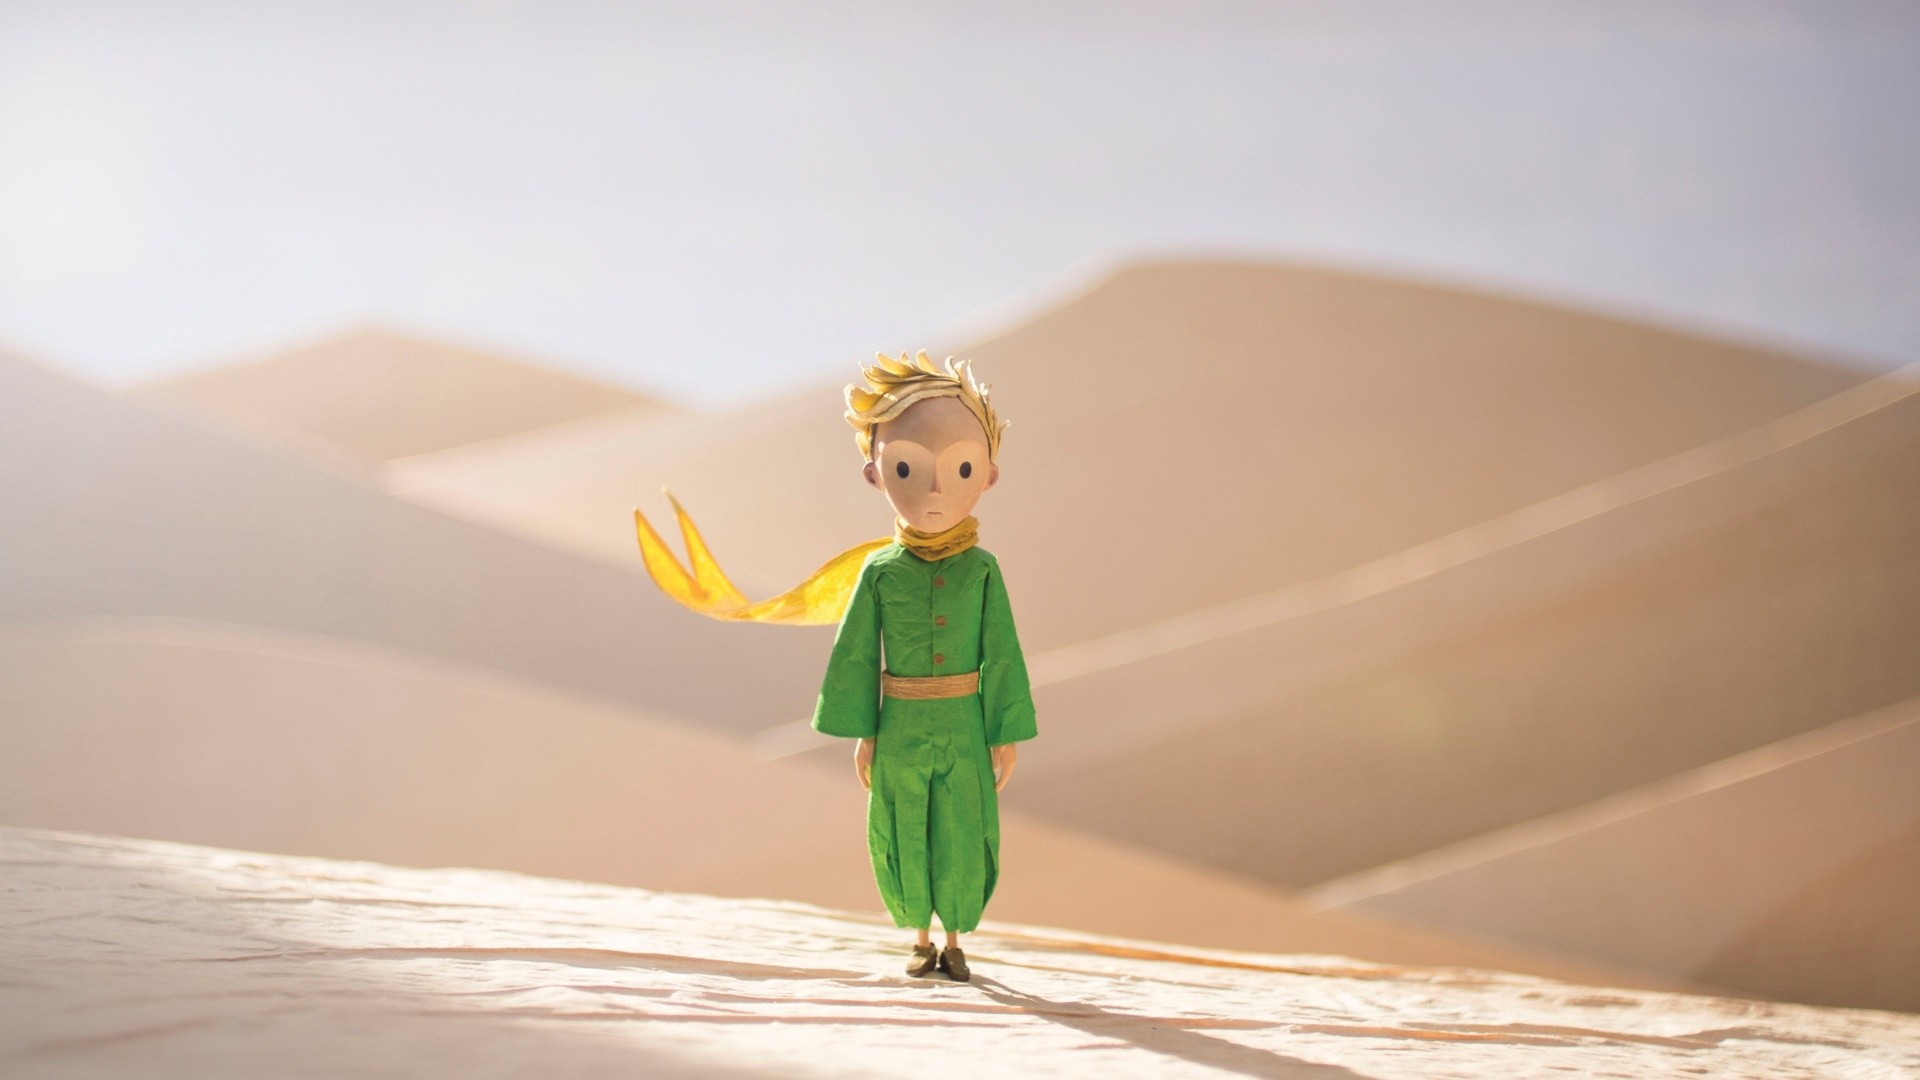 1920x1080 The Little Prince In The Desert